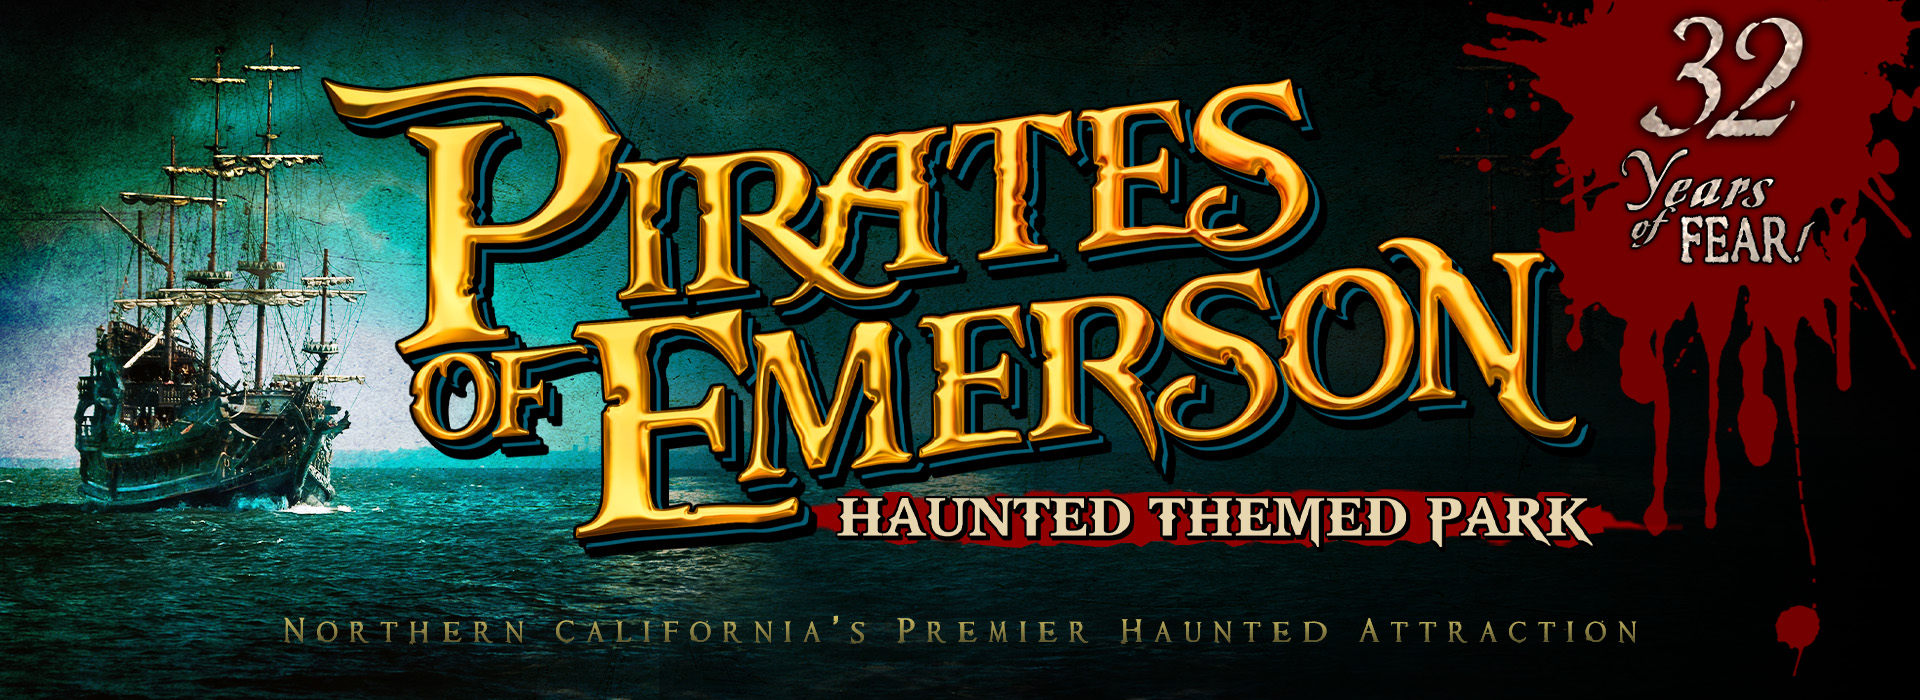 Pirates of Emerson Haunted Theme Park (Oct 6-8)